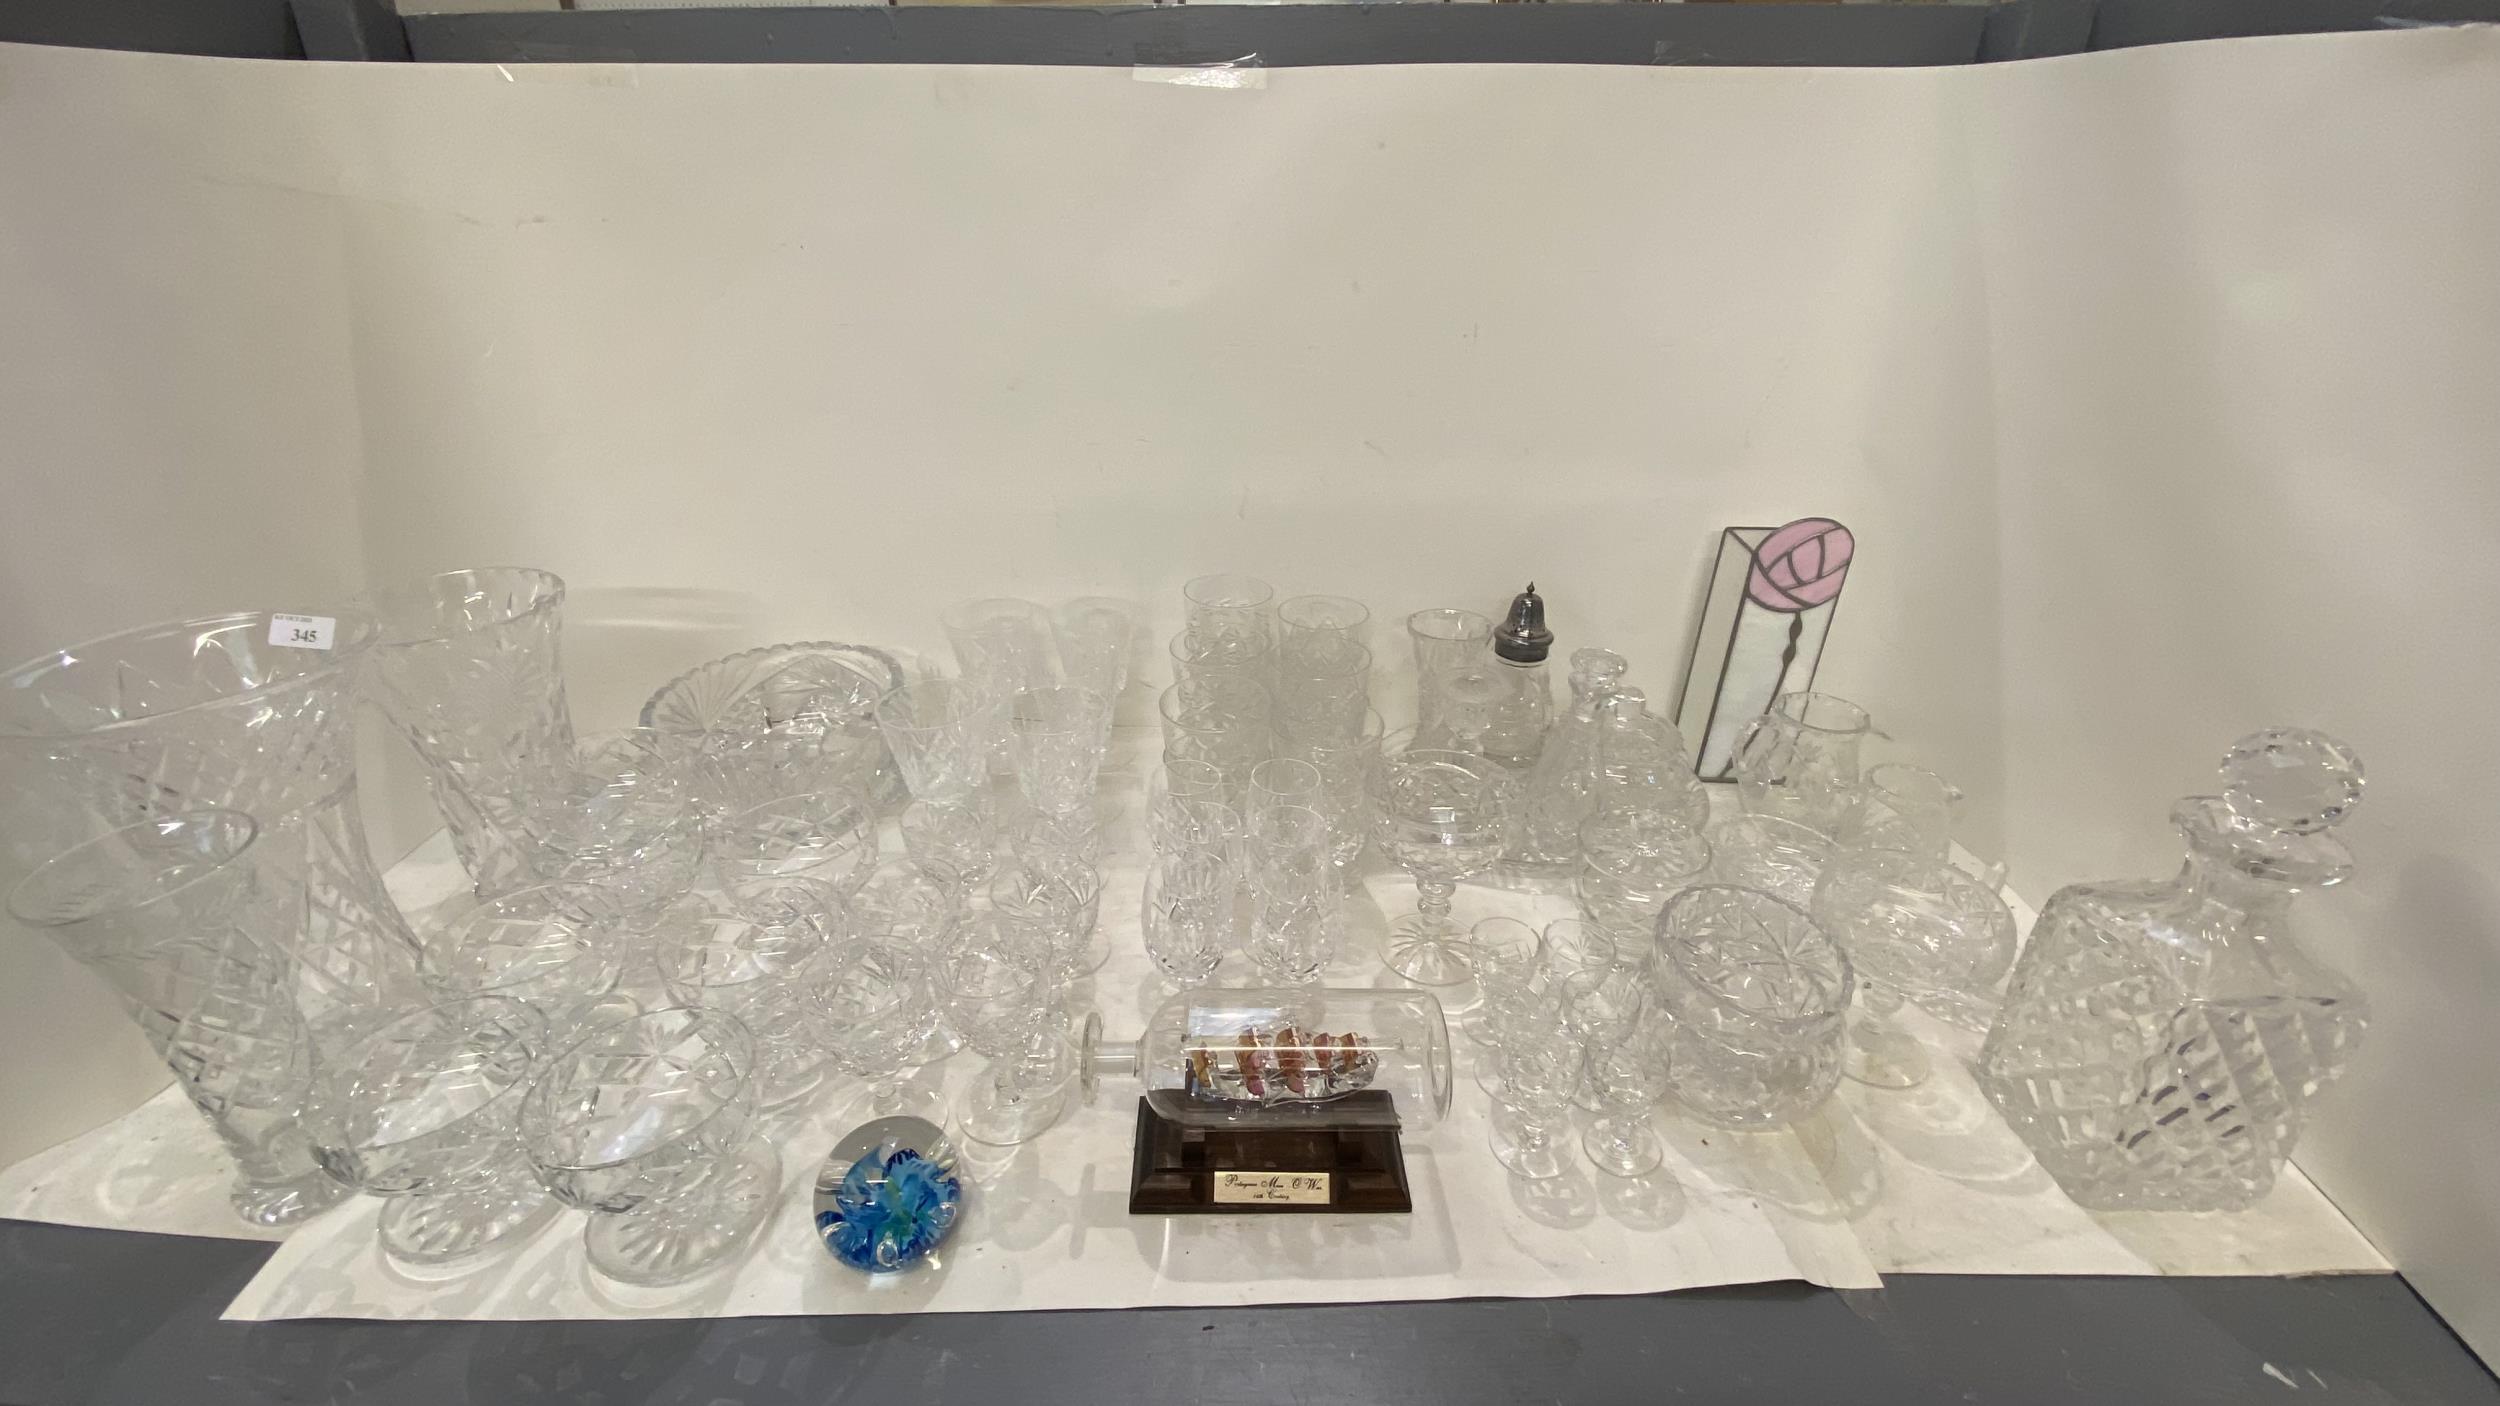 Large qty of glass wear including decanters, vases, wine glassed, tumblers etc.